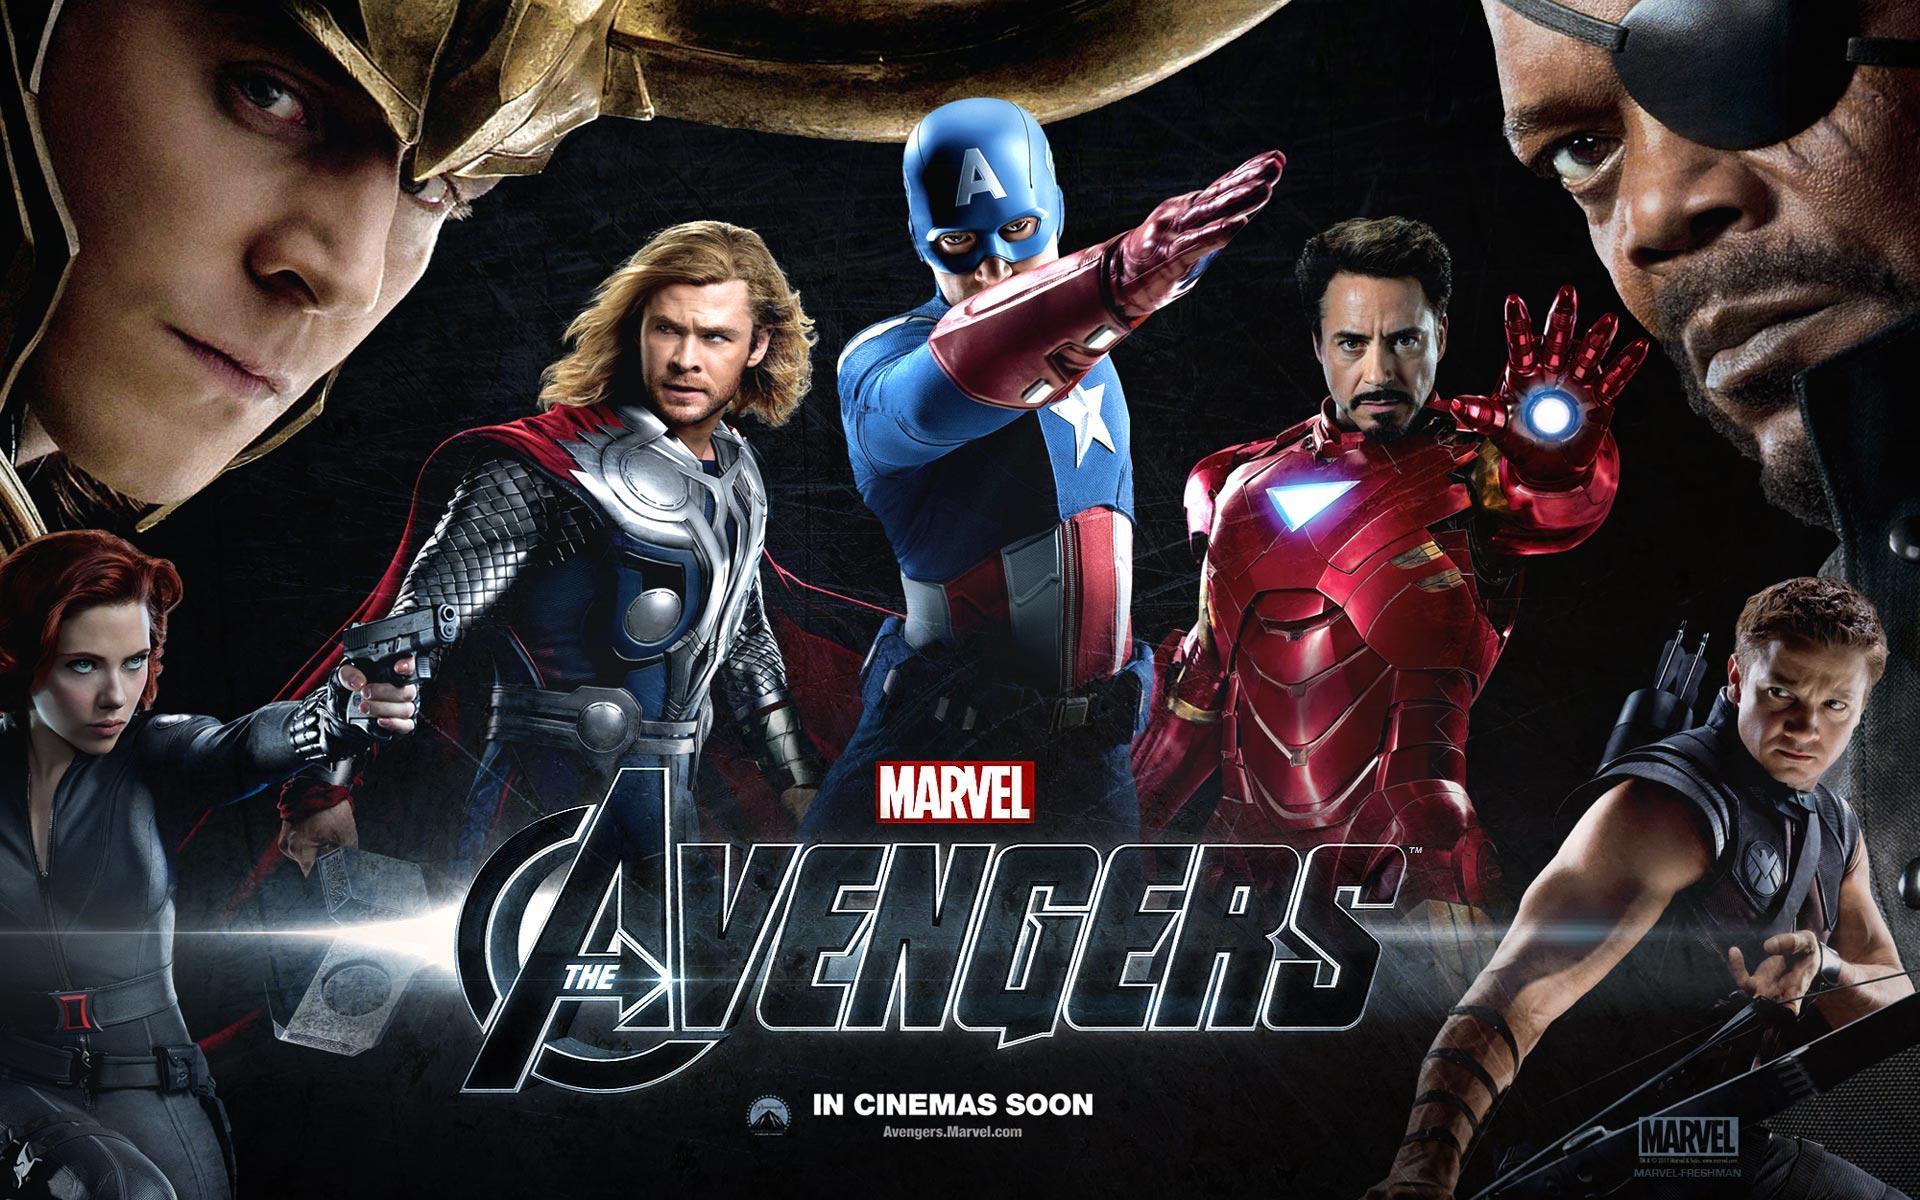 The Avengers Wallpapers Hd 28777 Image